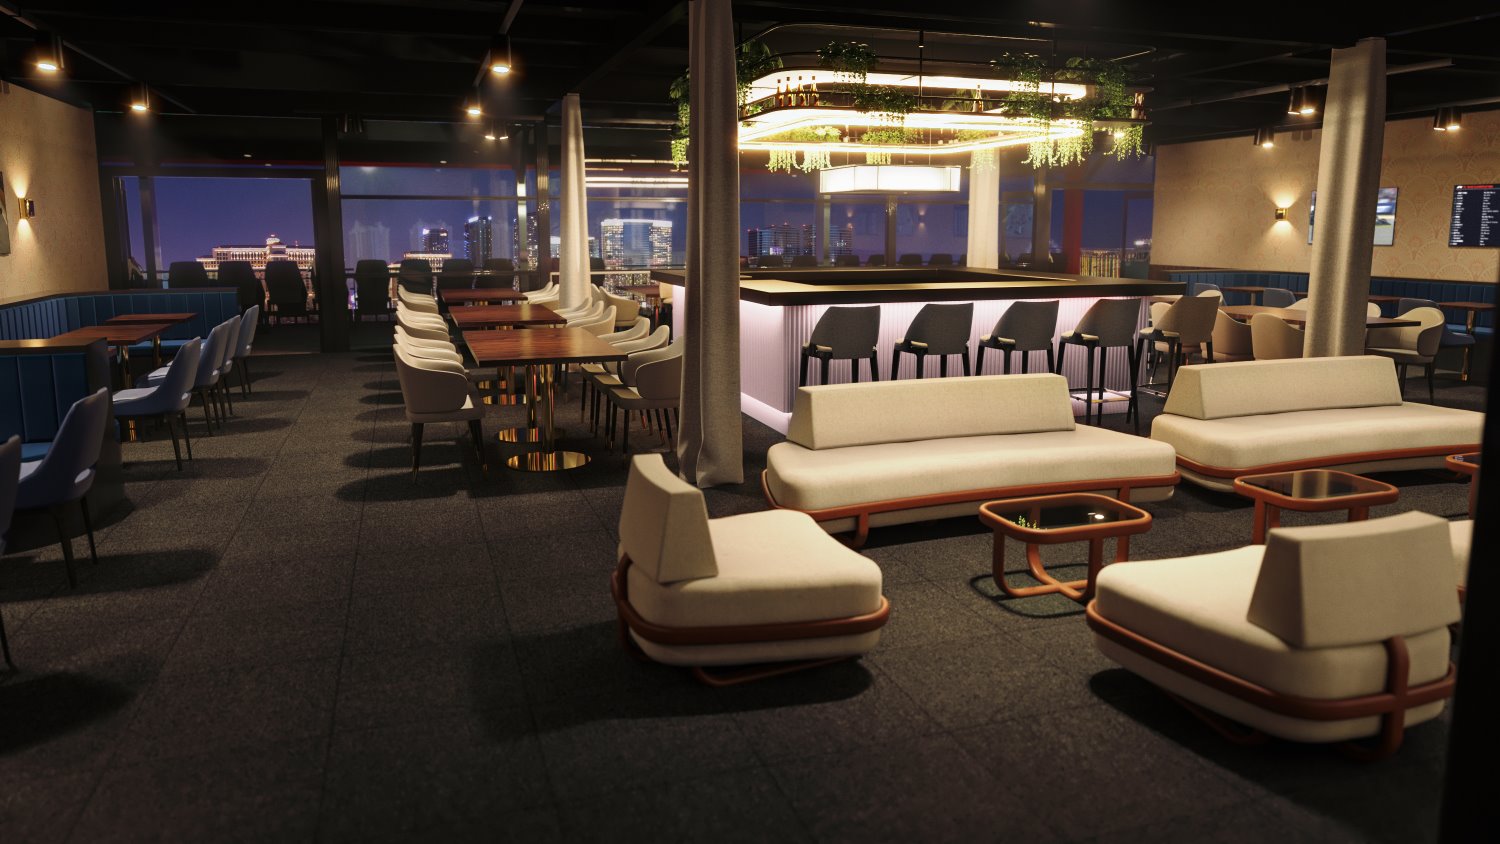 Rendering of Mercedes F1 Hospitality Suite